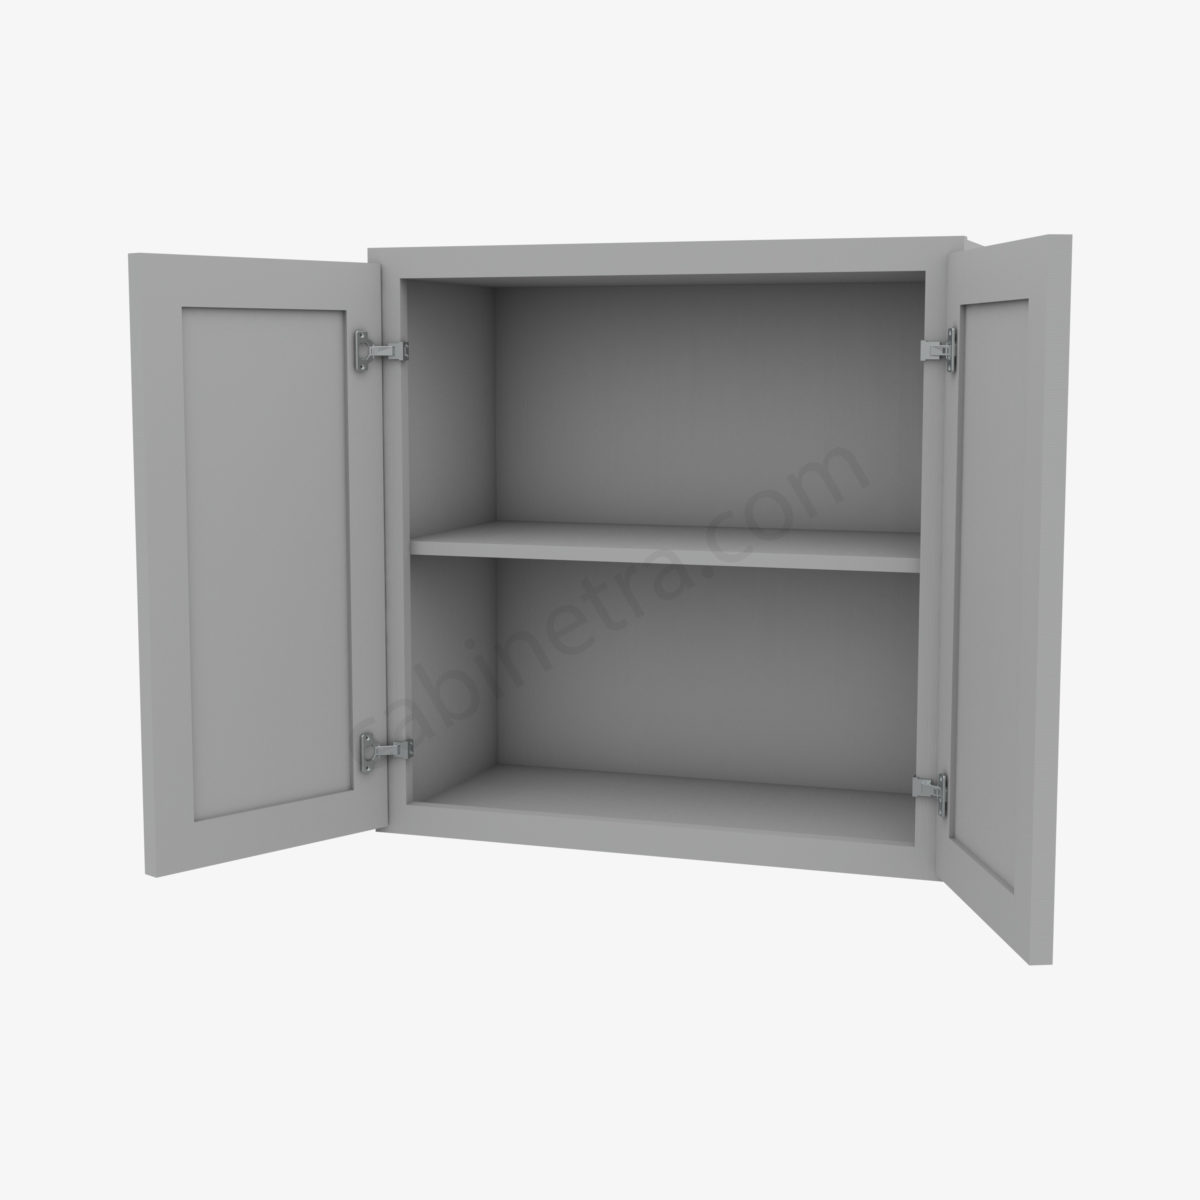 AB W2424B 5 Forevermark Lait Gray Shaker Cabinetra scaled